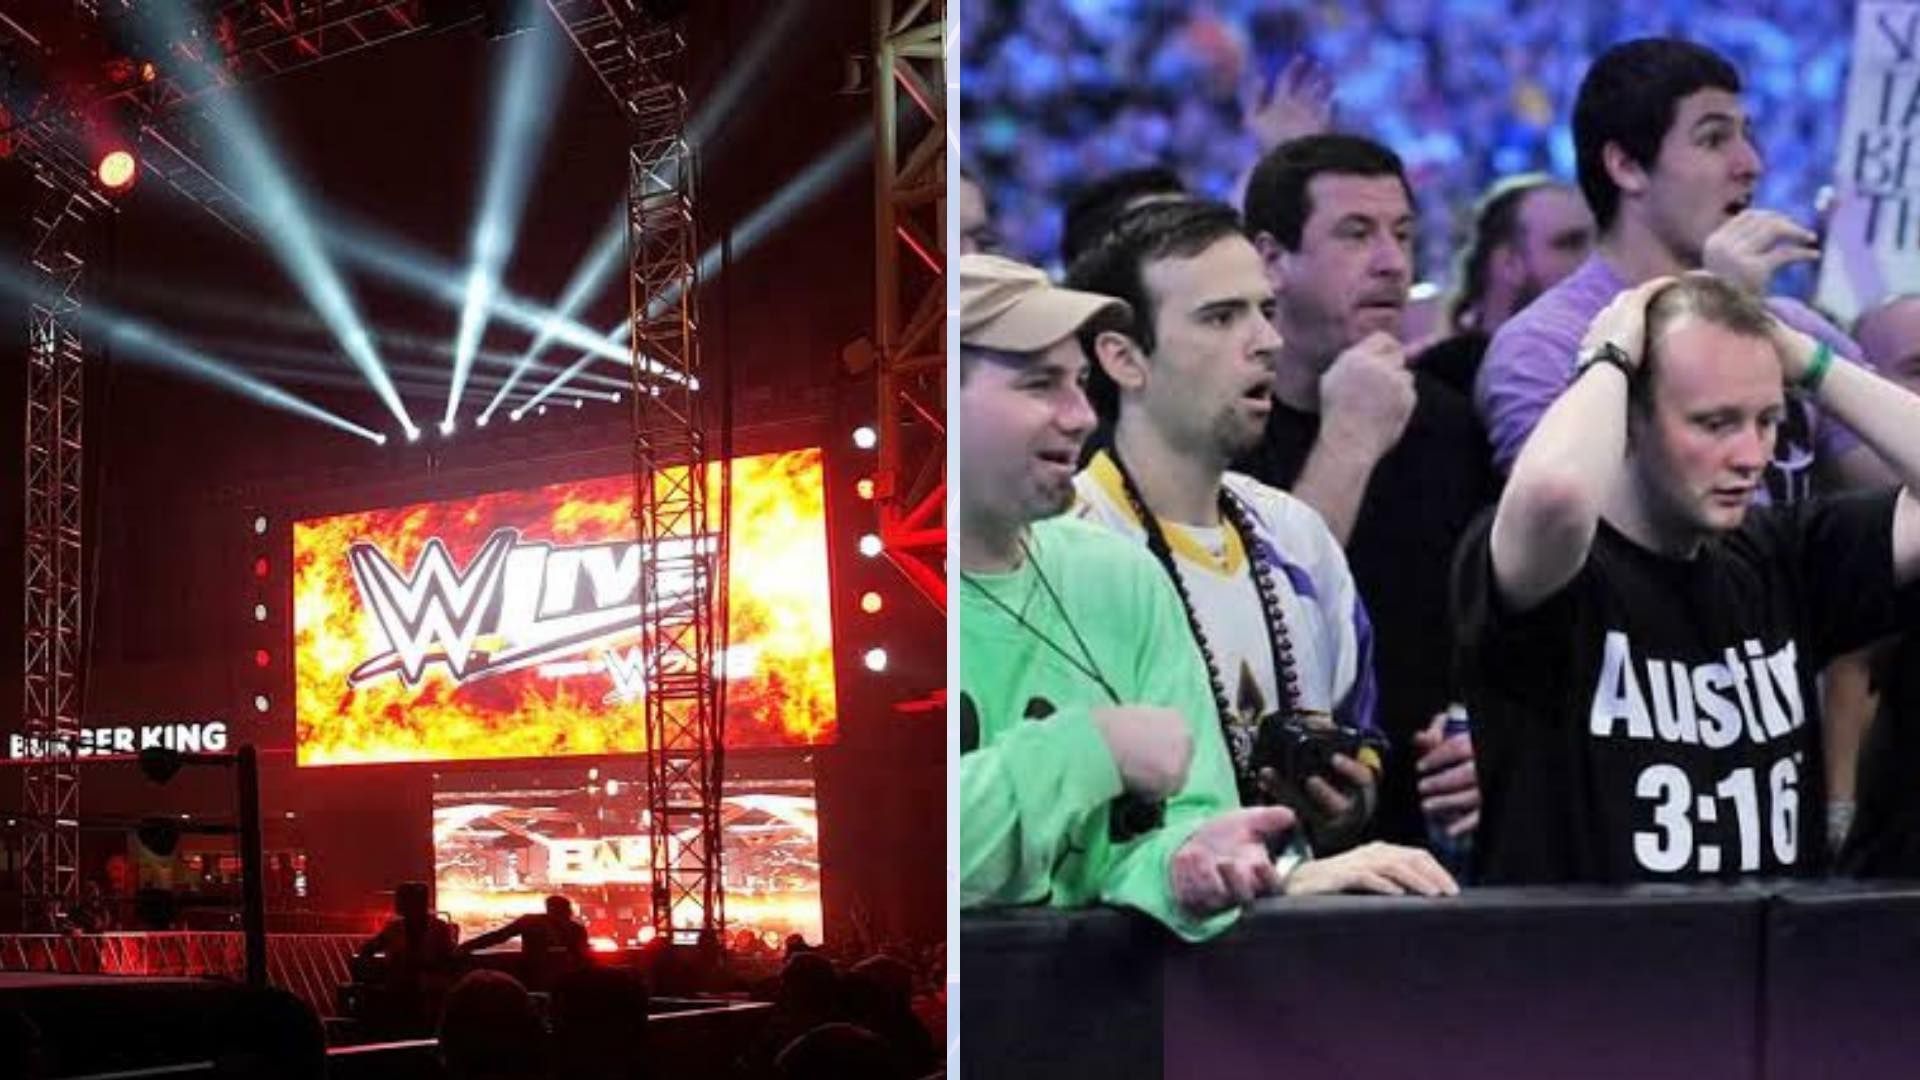 WWE stage and fans